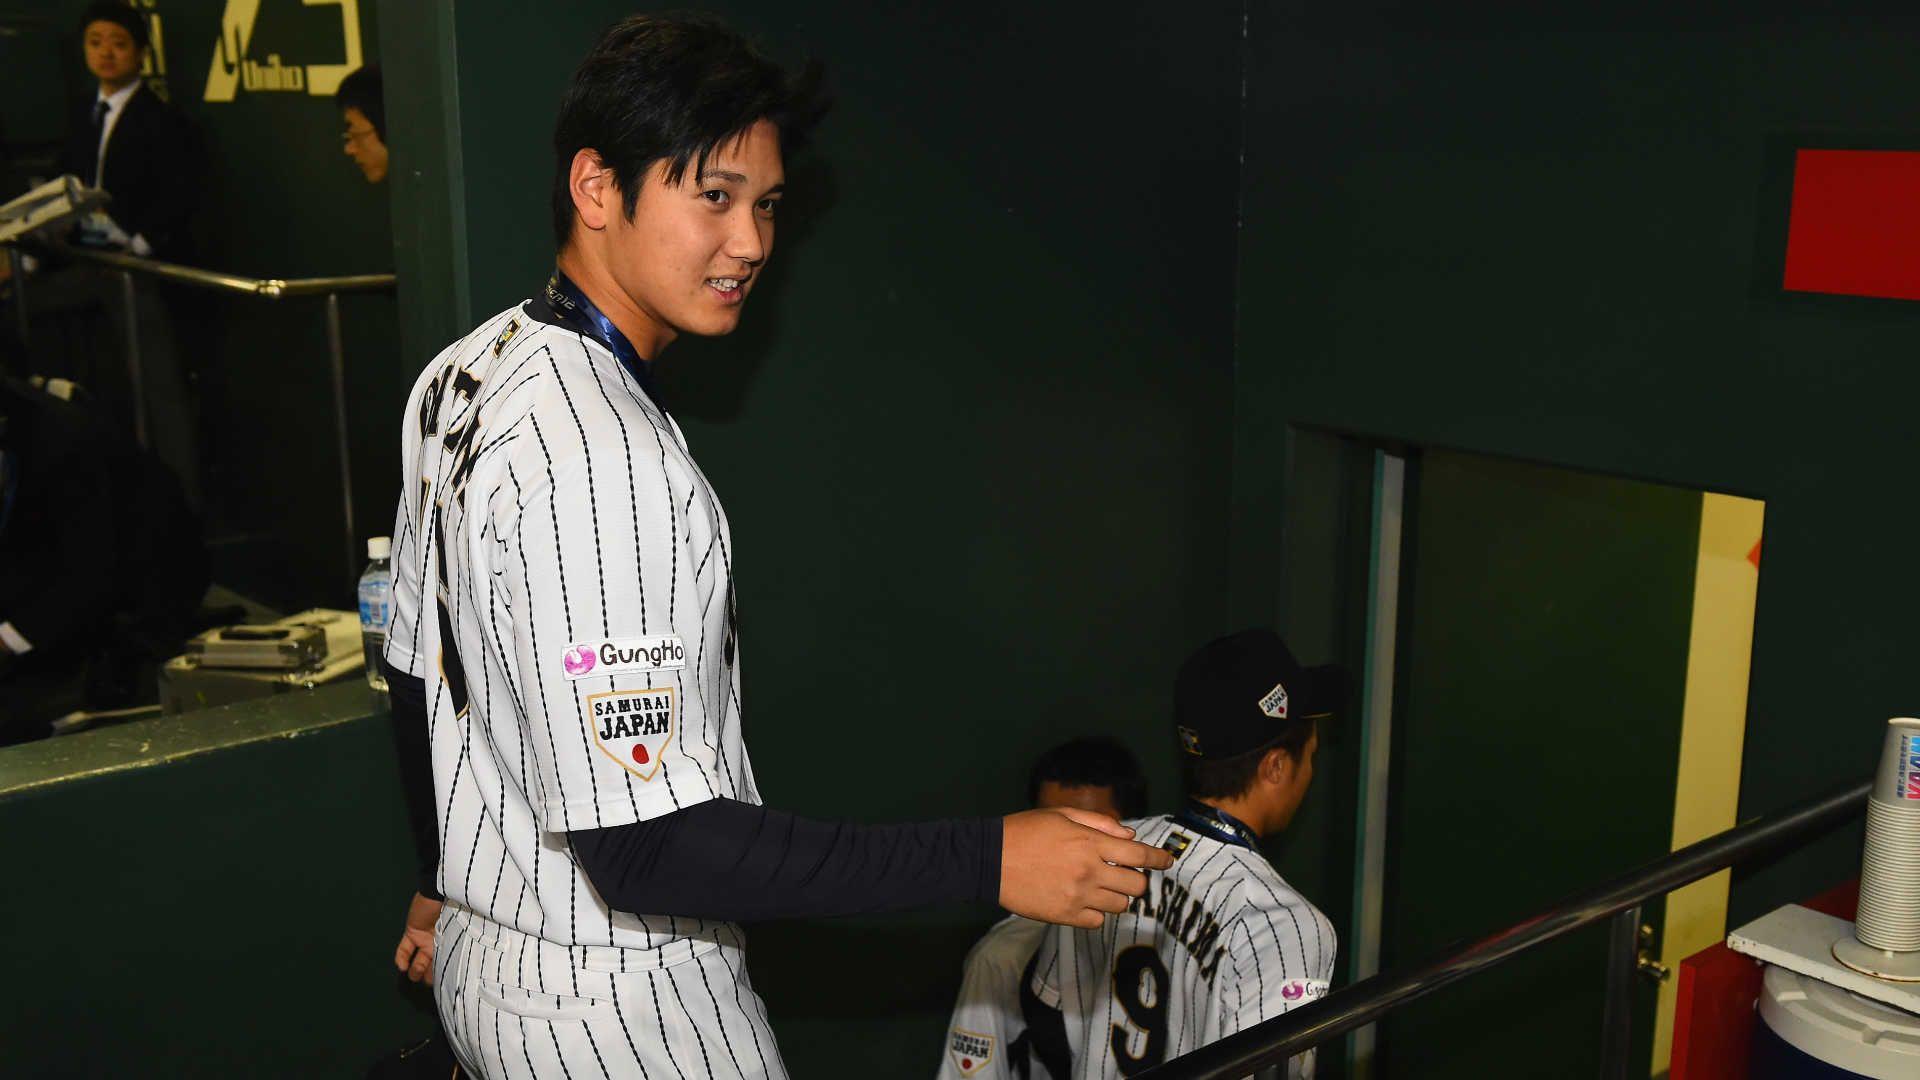 Japan's 'Babe Ruth' Shohei Ohtani wants to pitch in MLB next